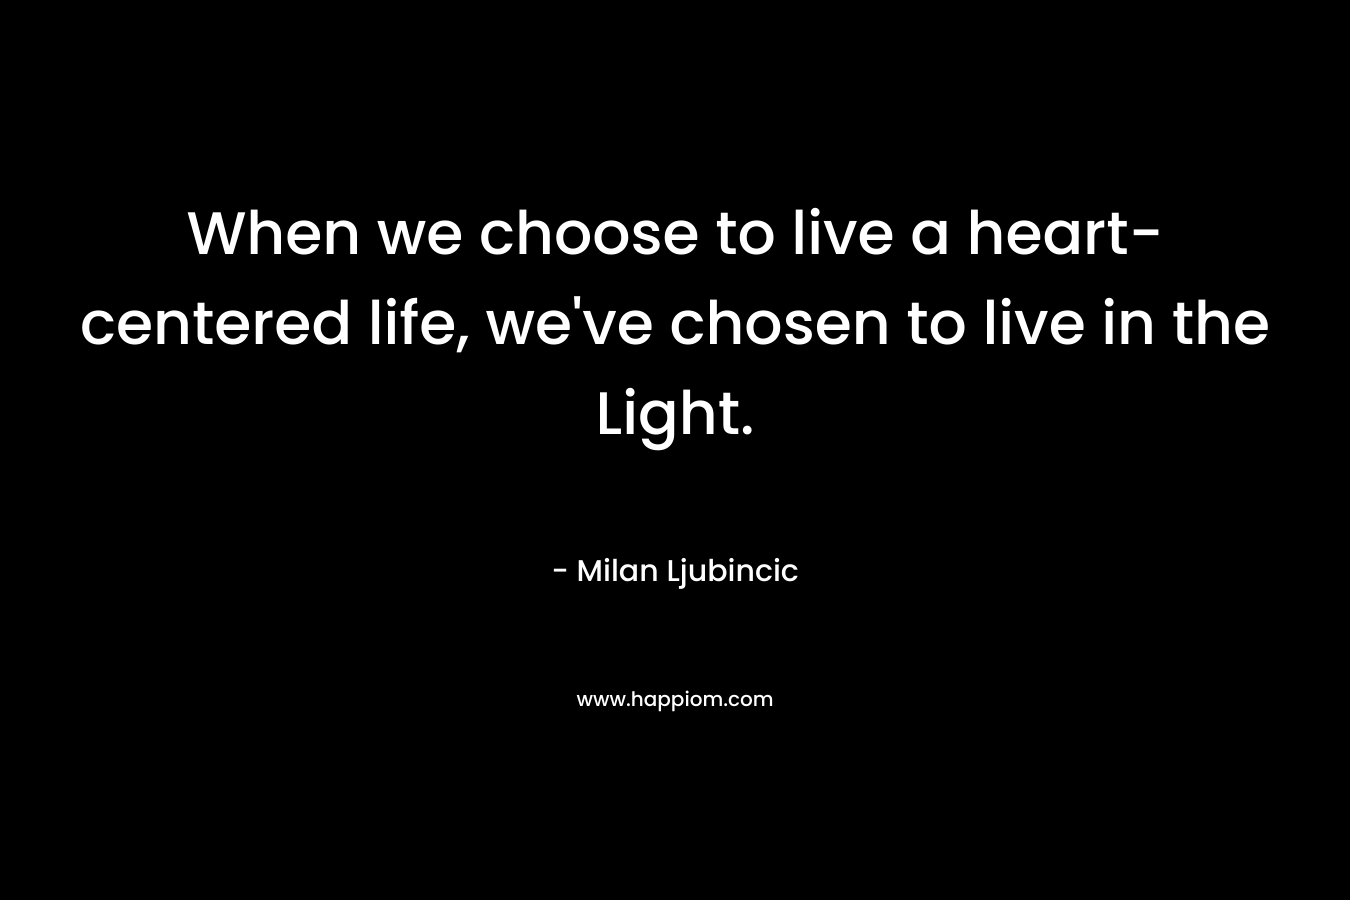 When we choose to live a heart-centered life, we've chosen to live in the Light.